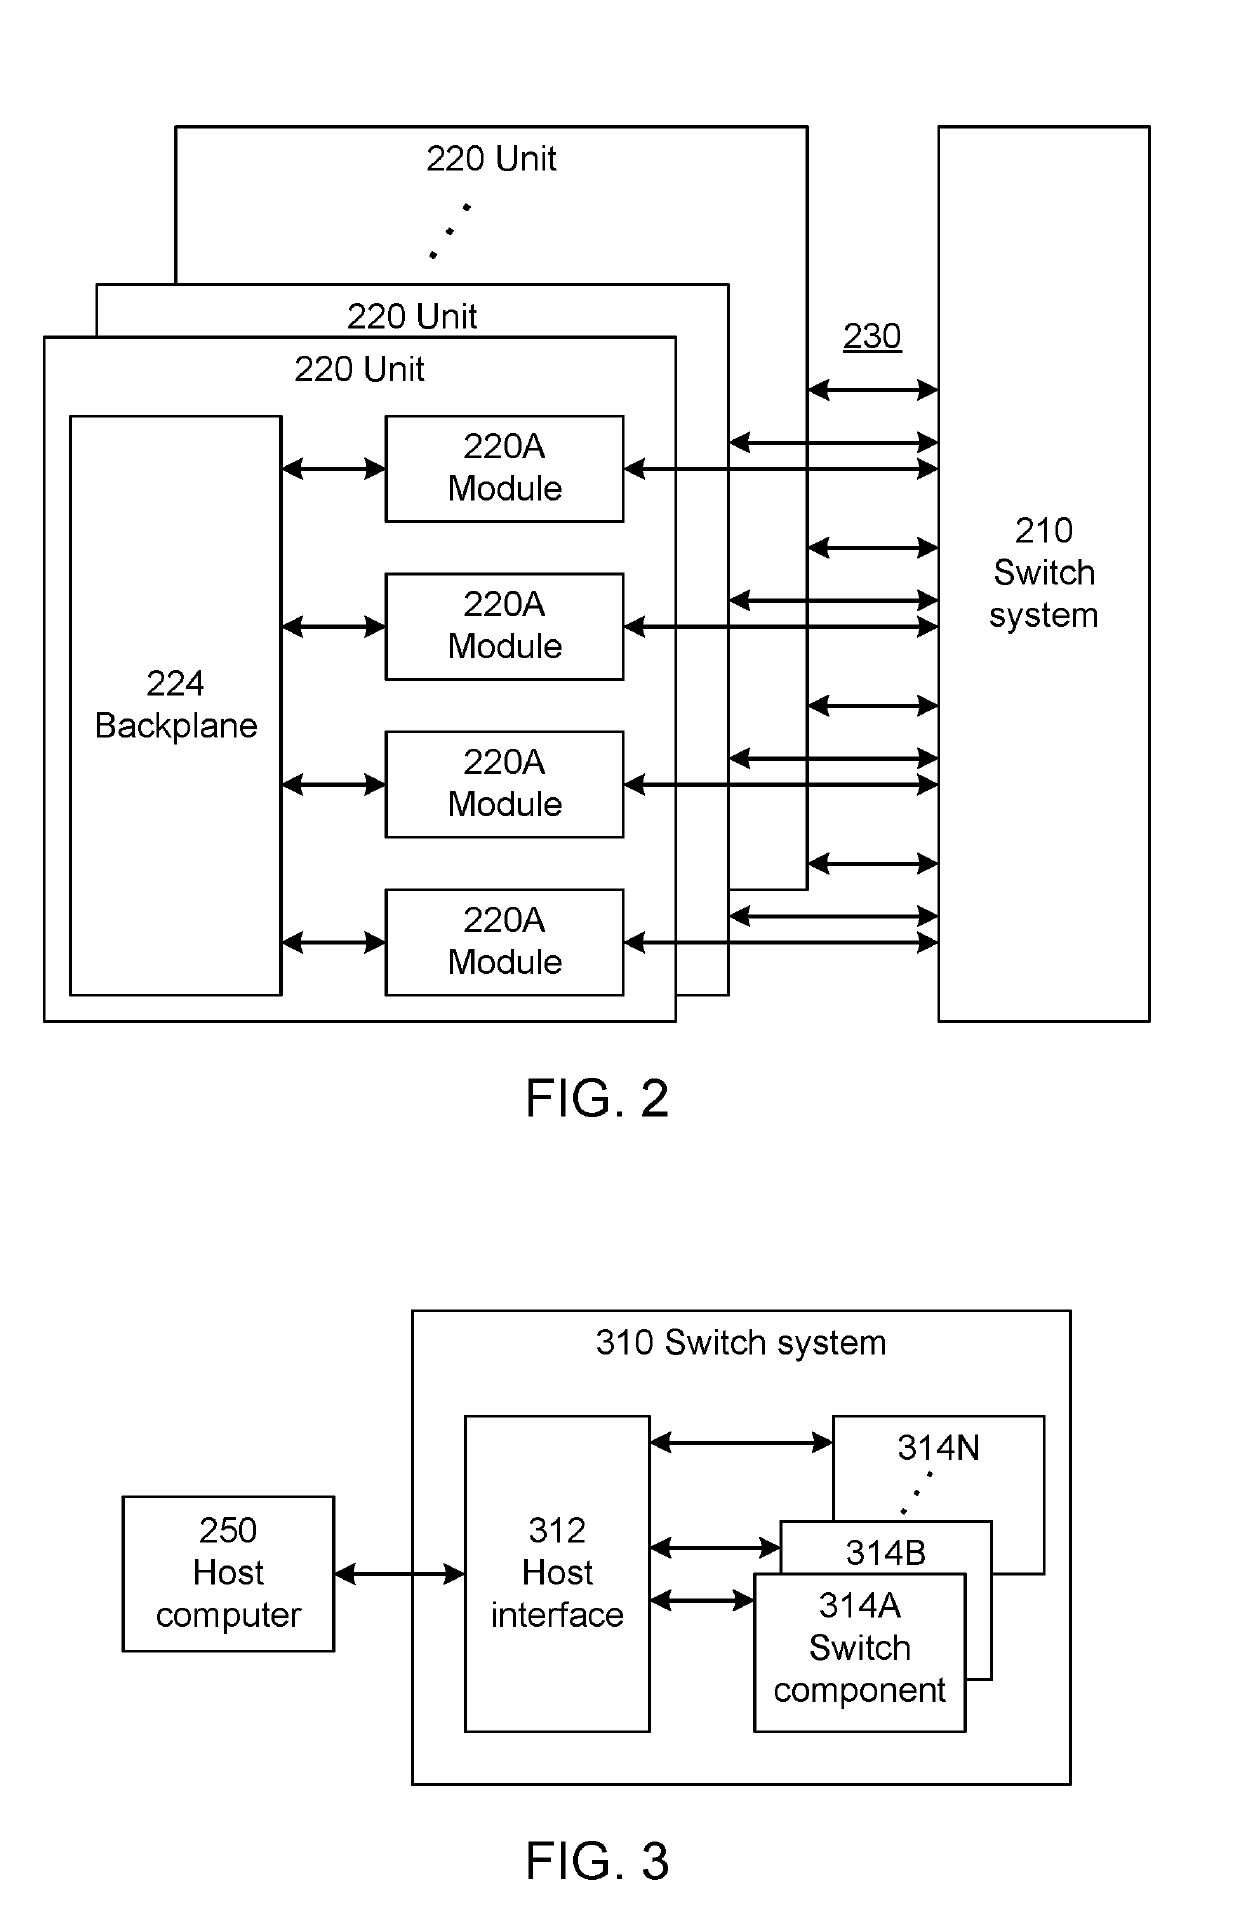 Fpga-based hardware emulator system with an inter-fpga connection switch